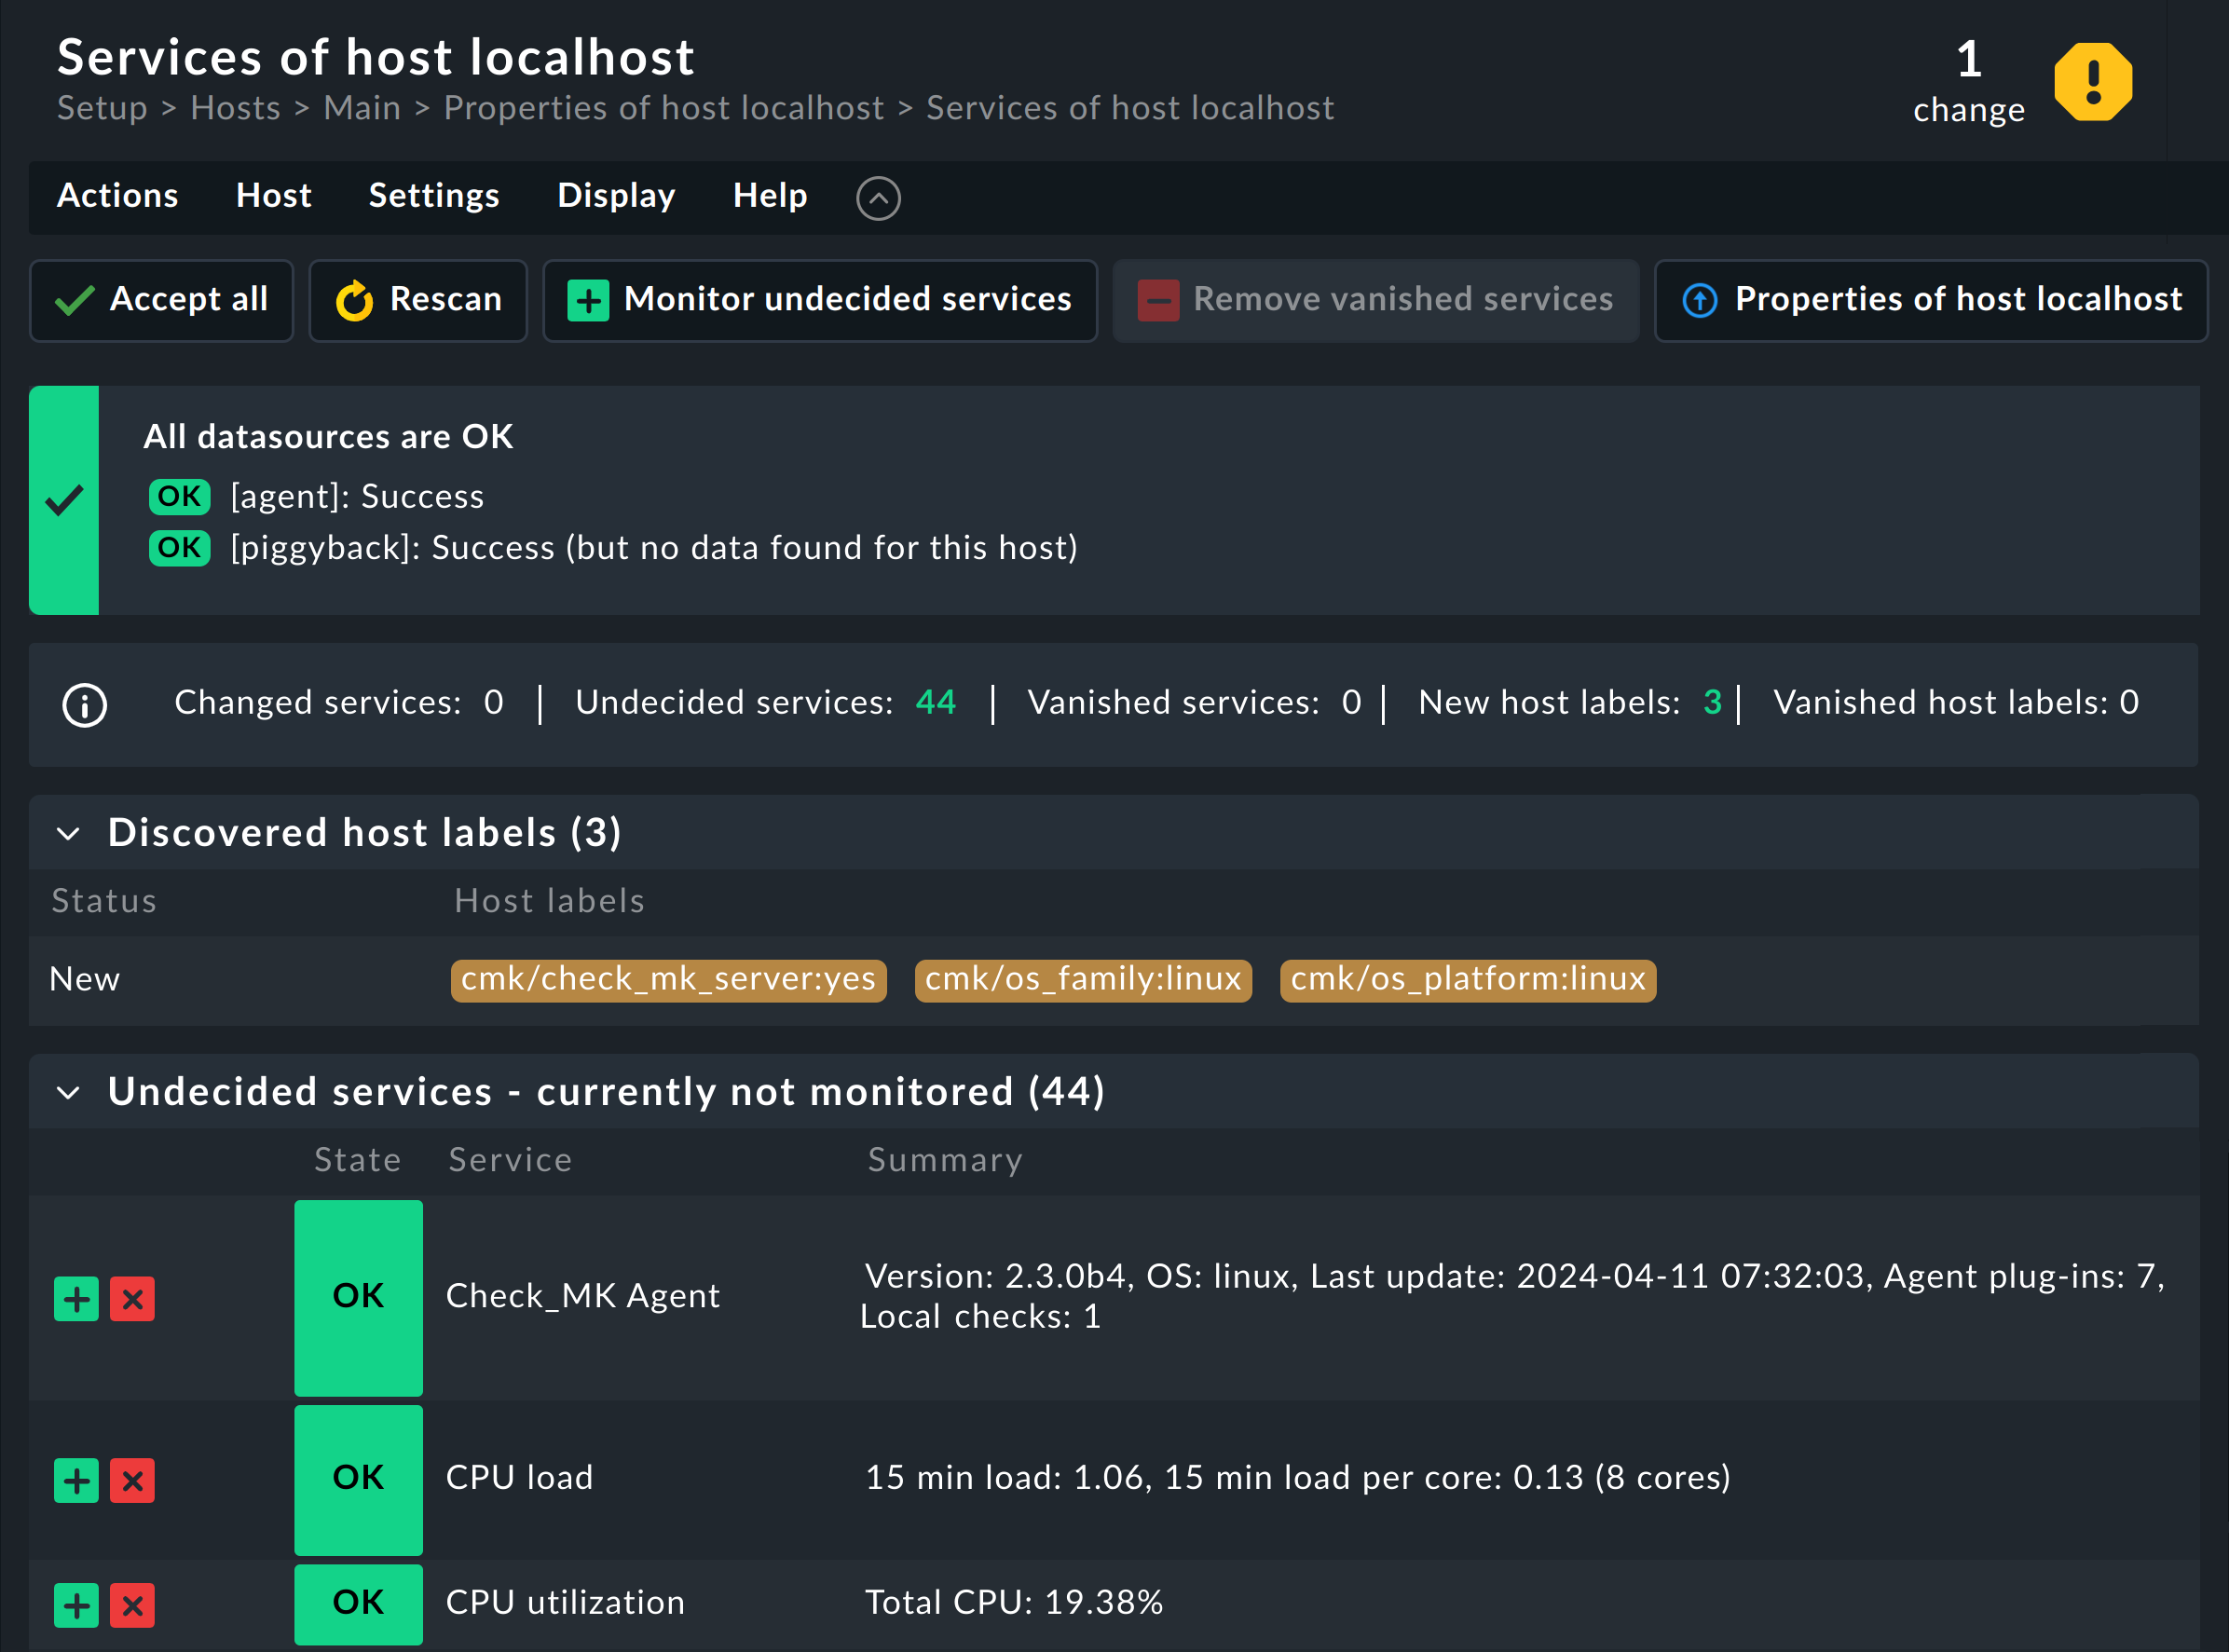 List of services found on the host for adding to monitoring.